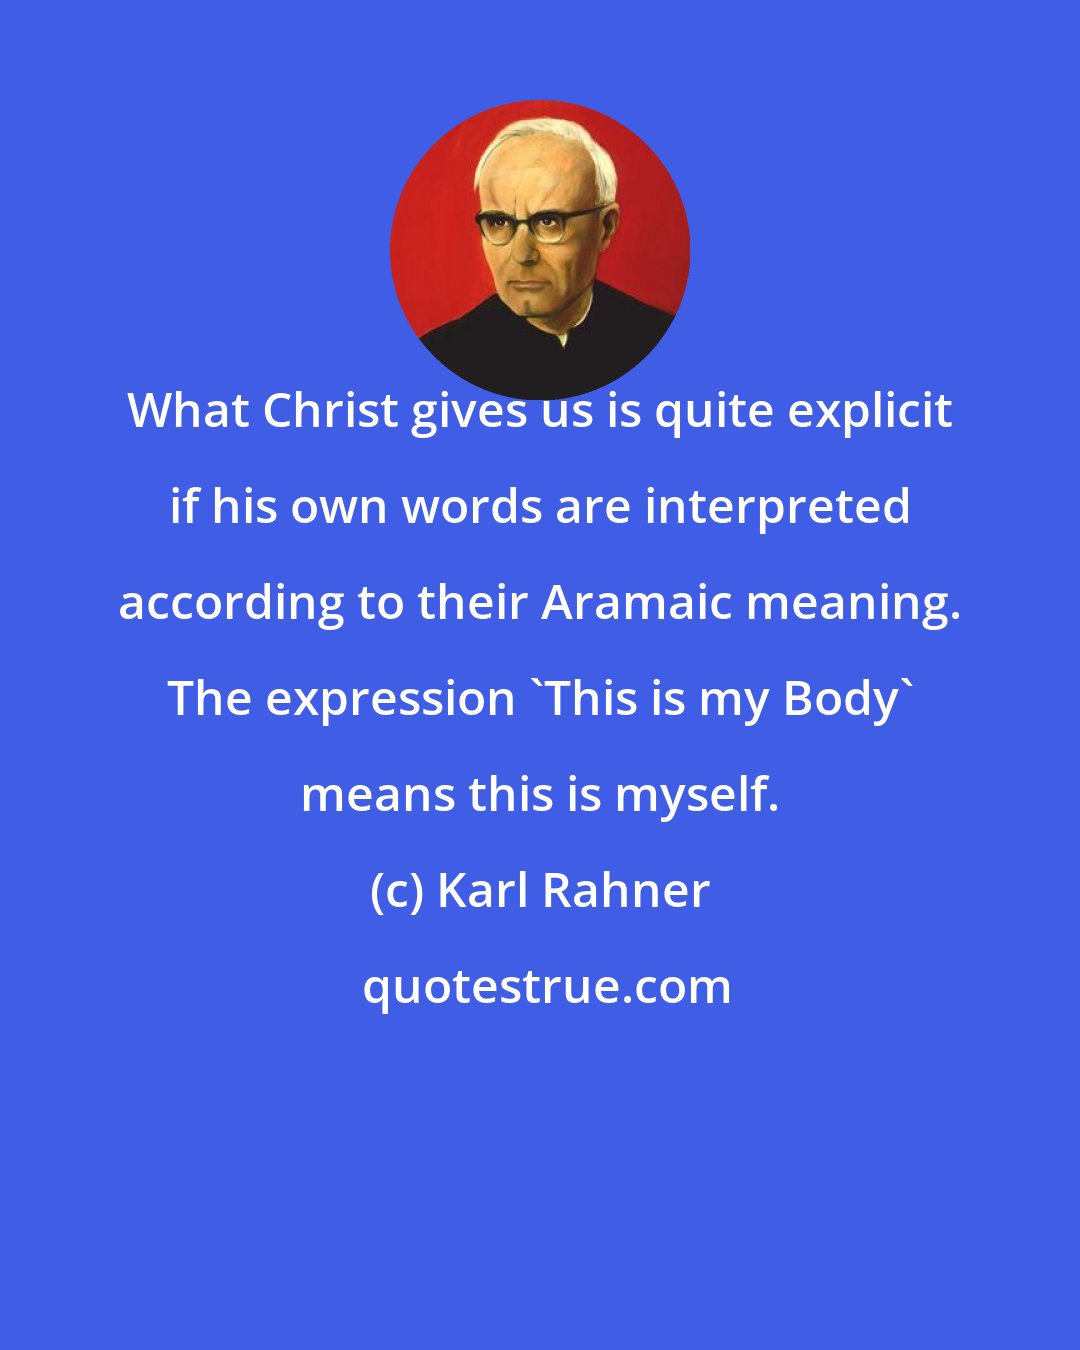 Karl Rahner: What Christ gives us is quite explicit if his own words are interpreted according to their Aramaic meaning. The expression 'This is my Body' means this is myself.